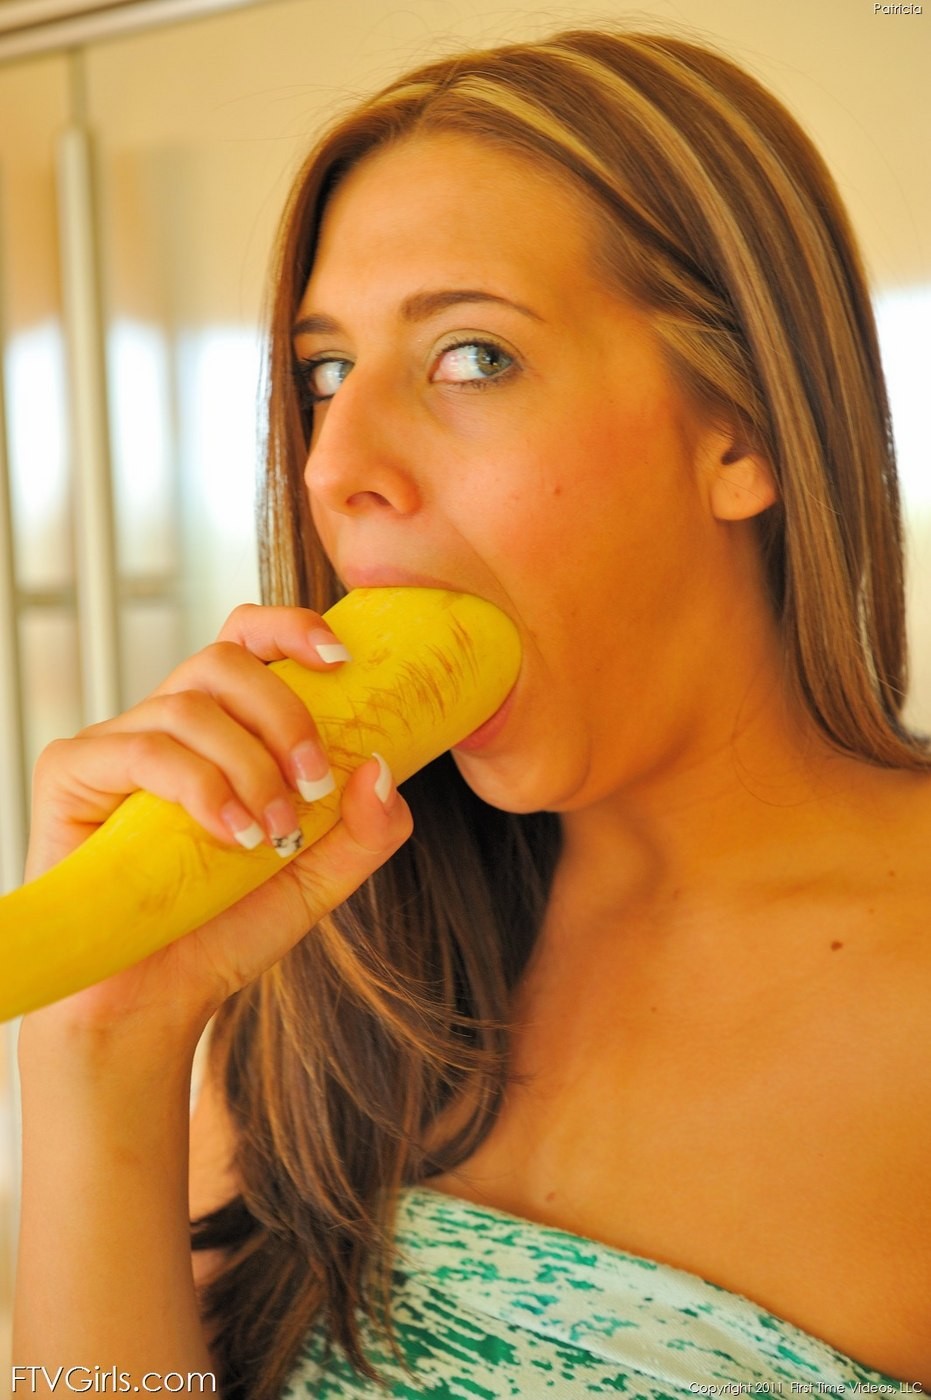 Kinky amateur teen toys with fruits and vegetables #73240731